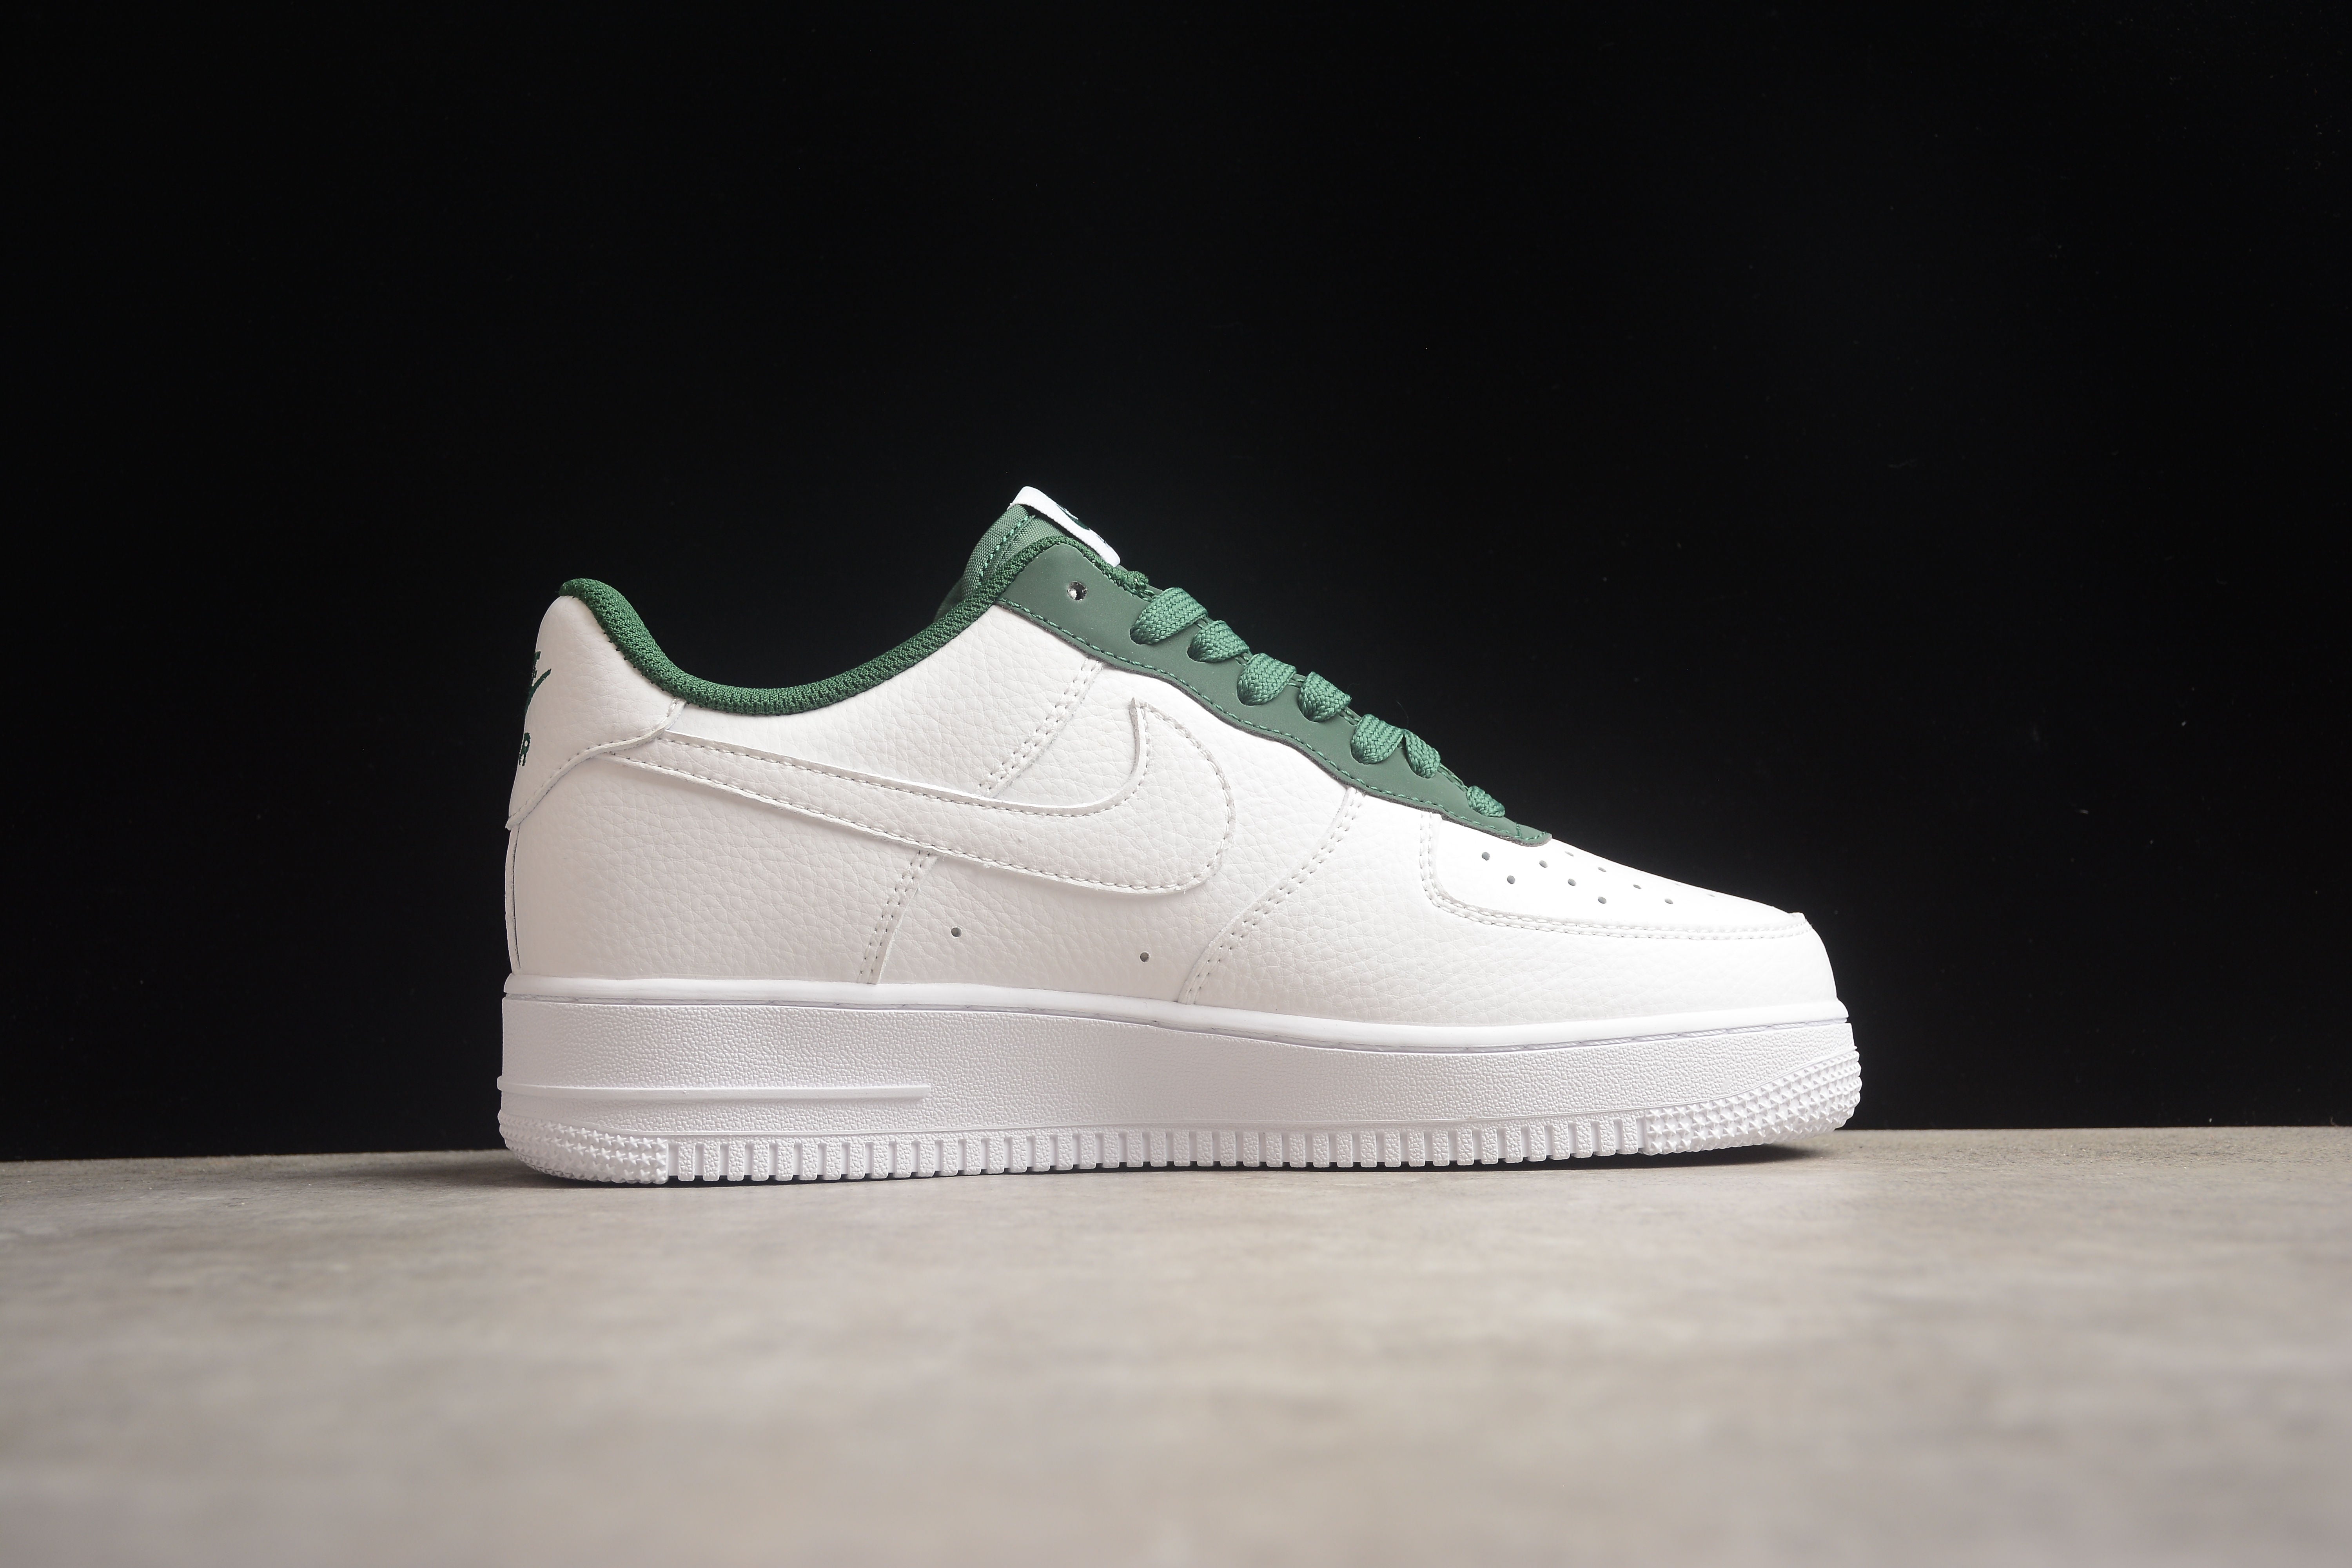 Nike airforce A1 dark green shoes